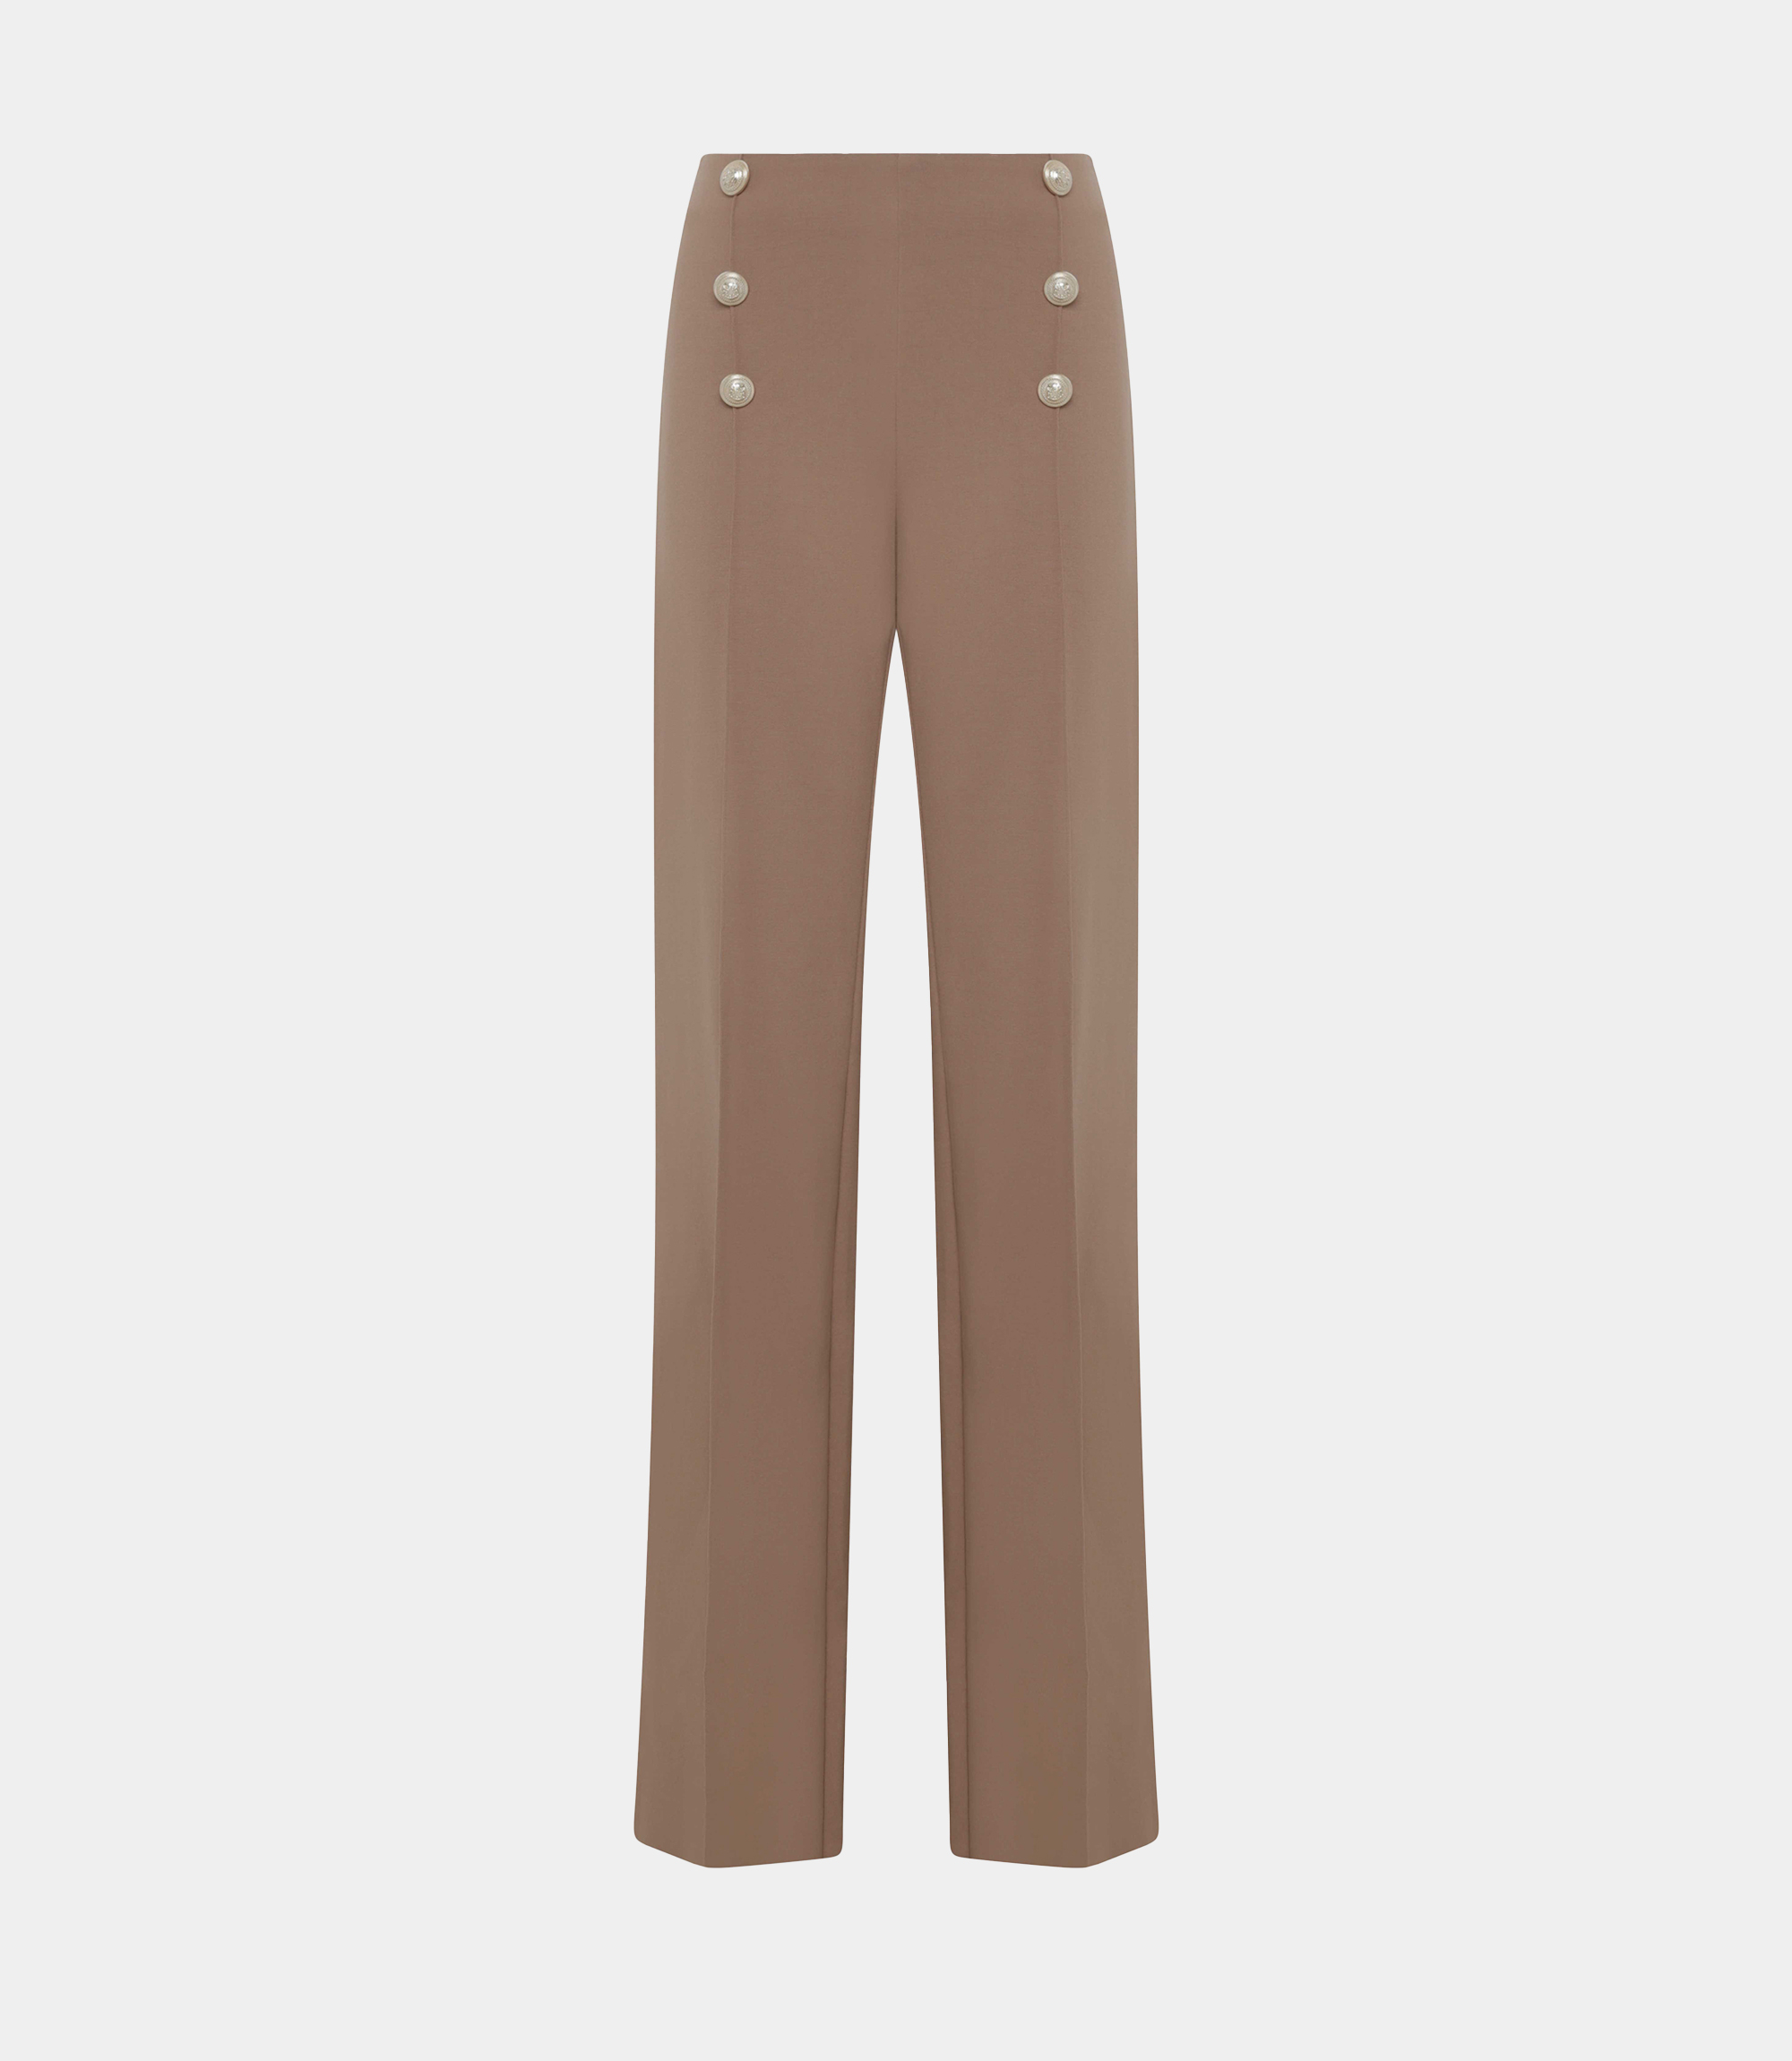 Palazzo trousers with buttons - CLOTHING - Nara Milano